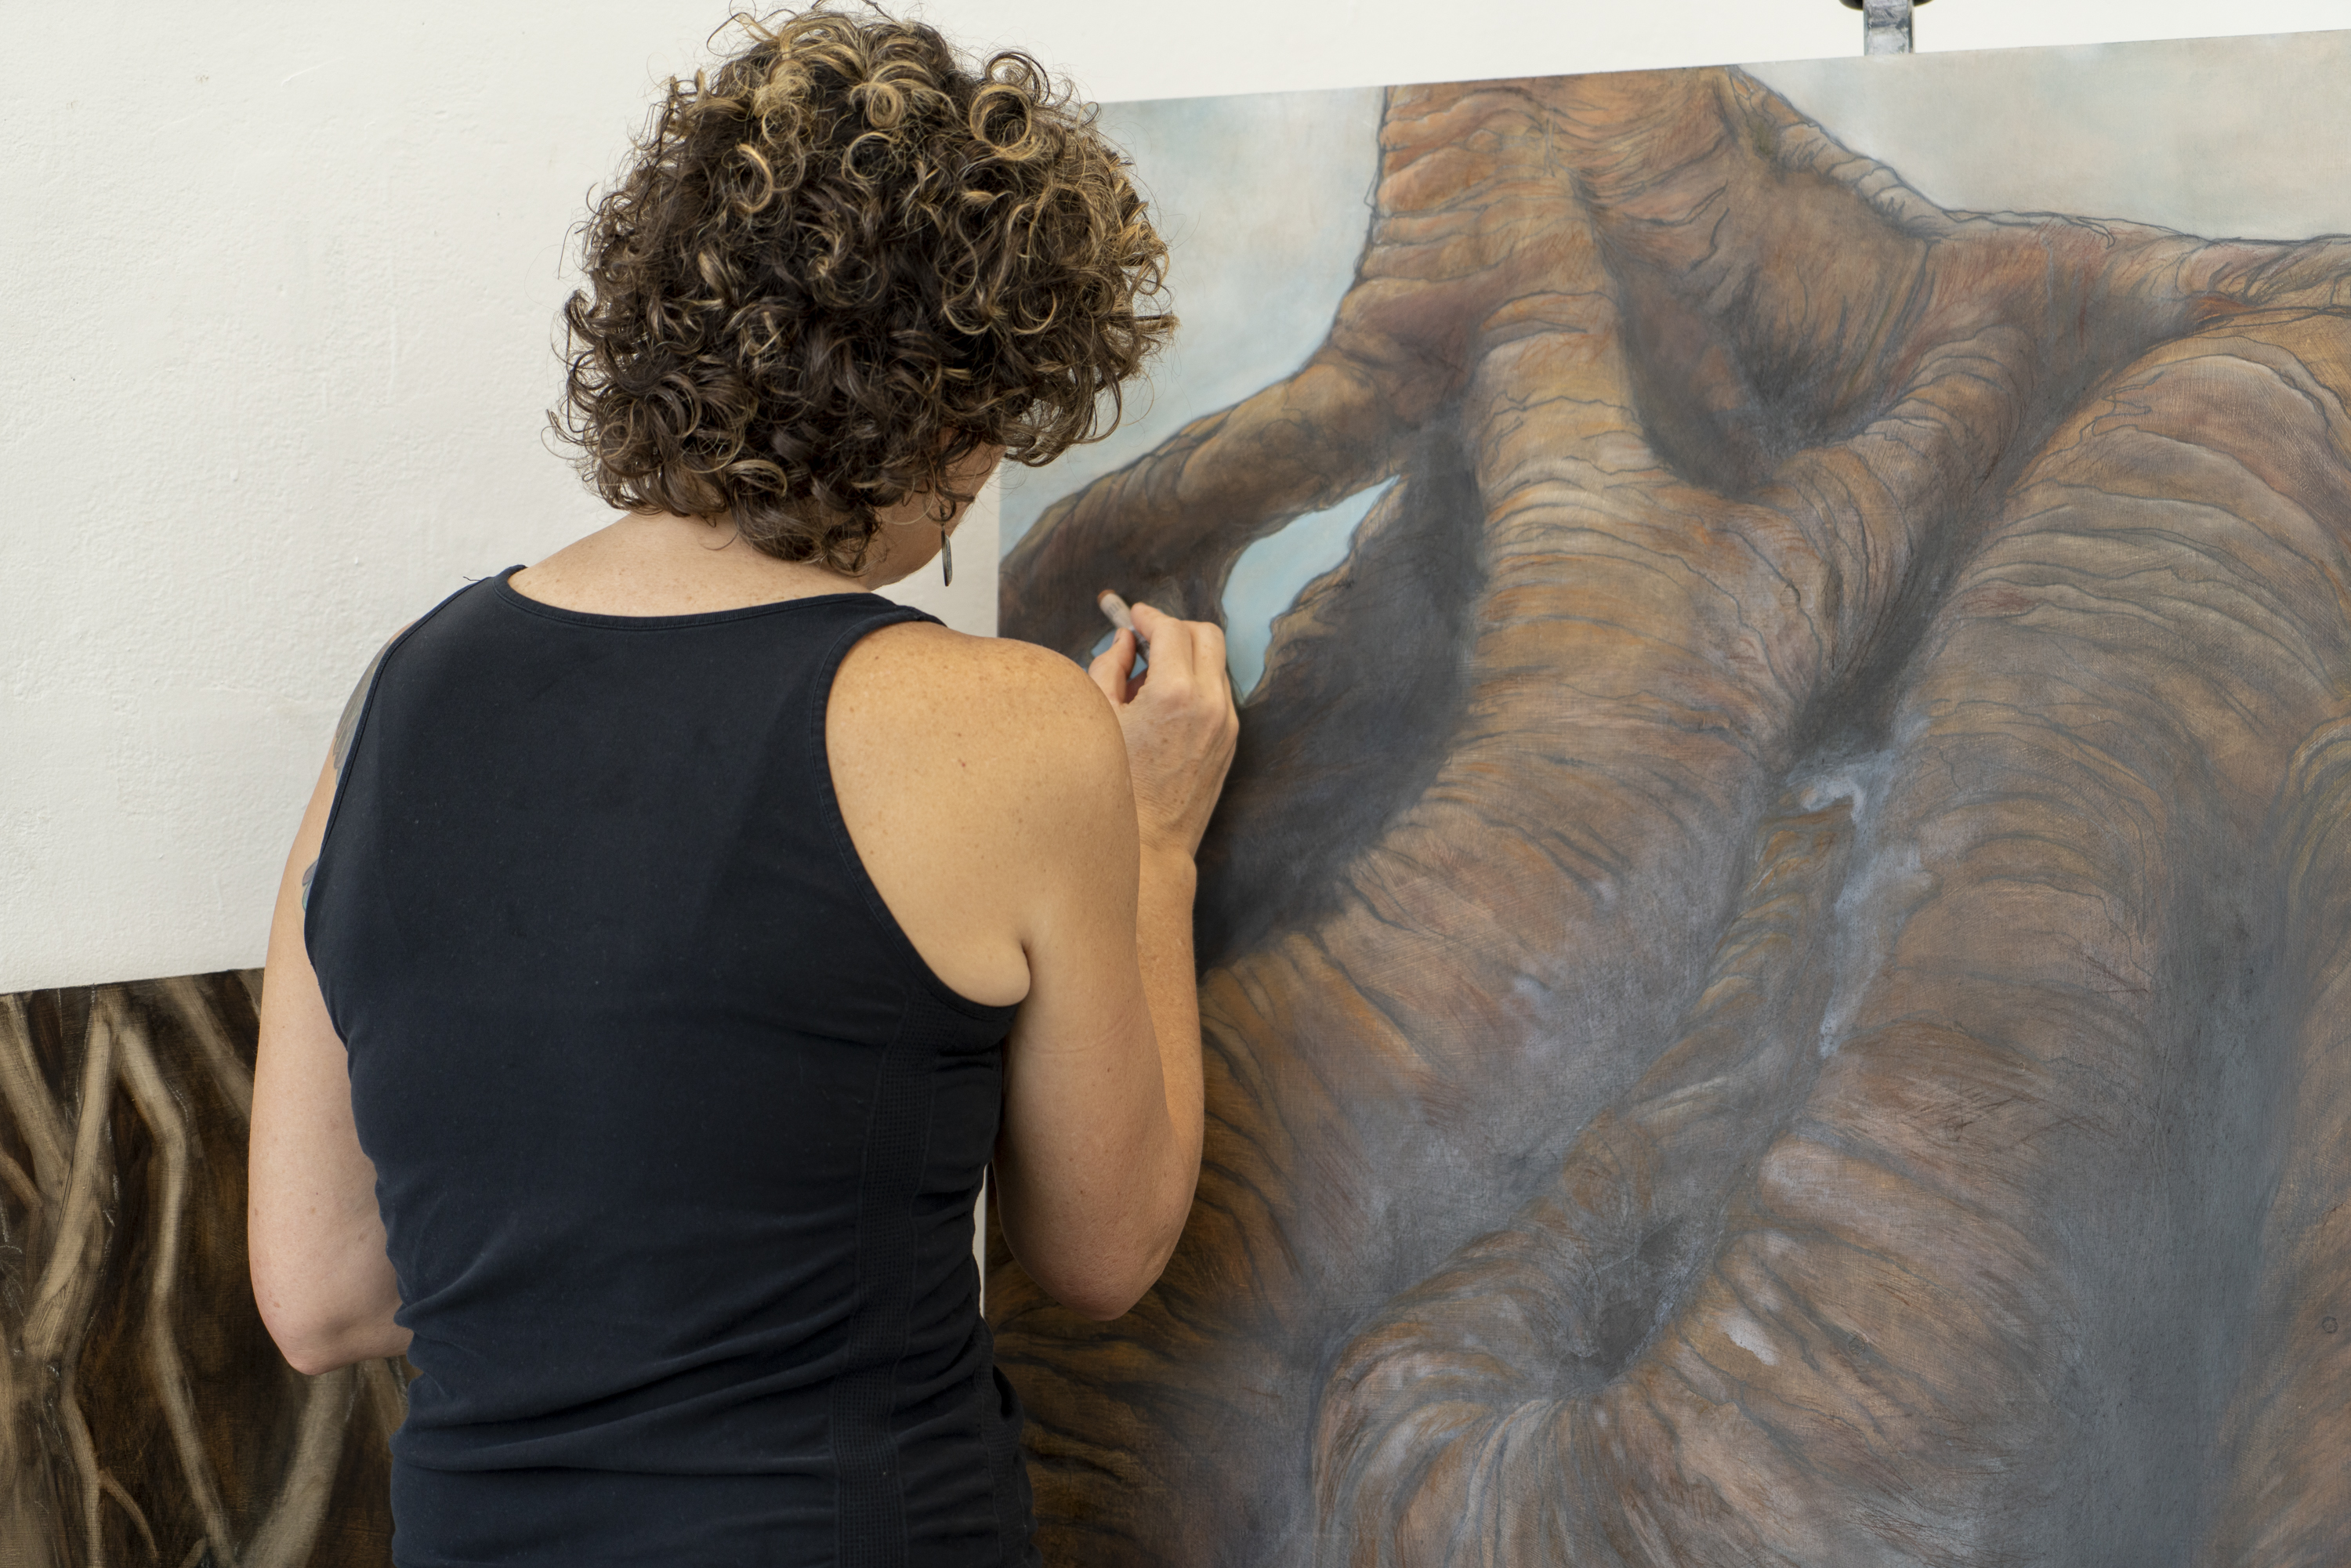 Adult artist drawing in brown chalk with their back to the viewer 